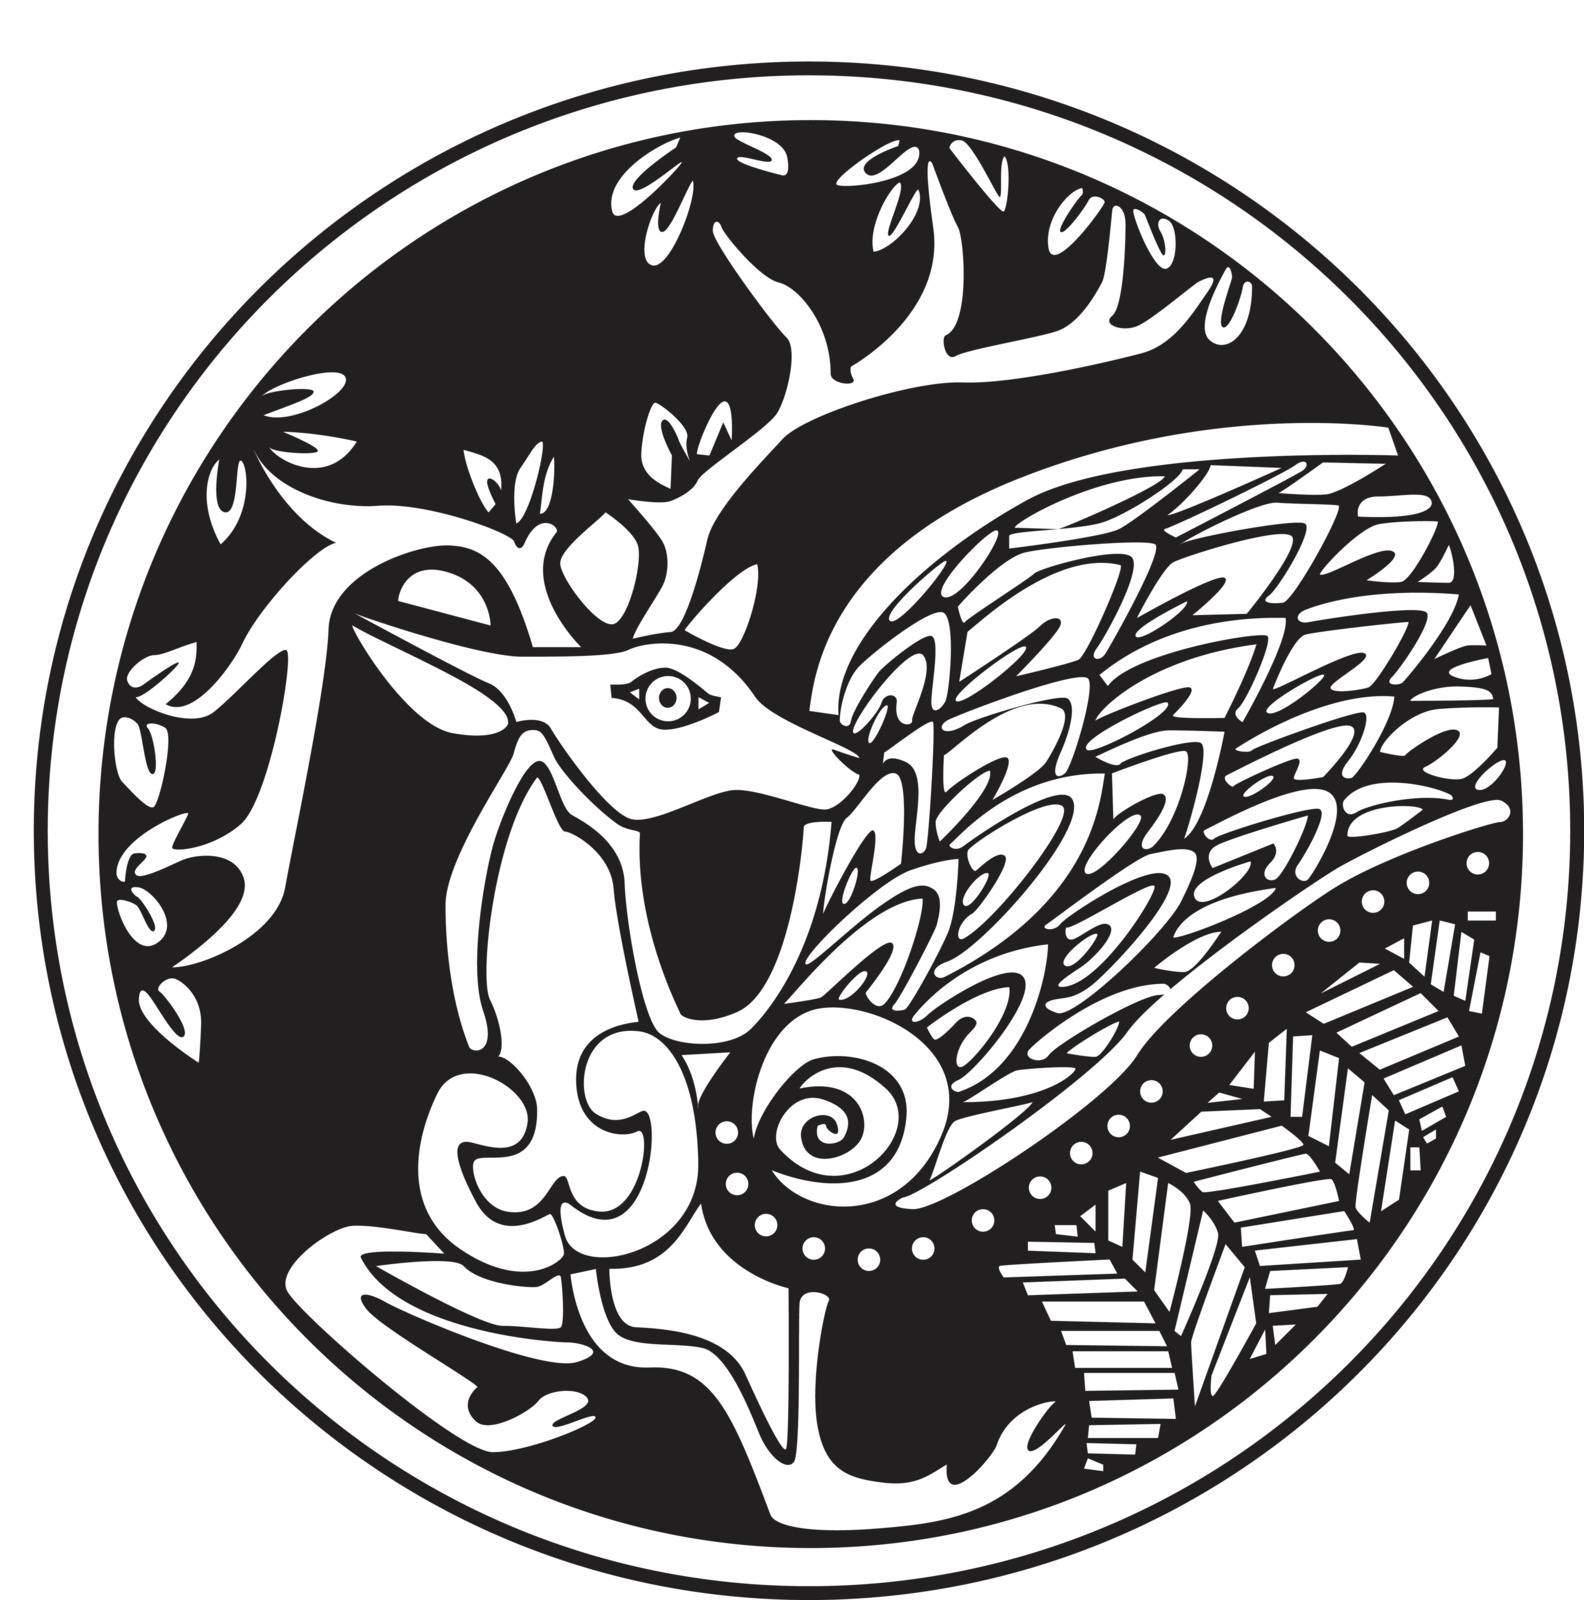 A druidic astronomical symbol of a deer, in a circle pattern artwork, isolated against a whit background